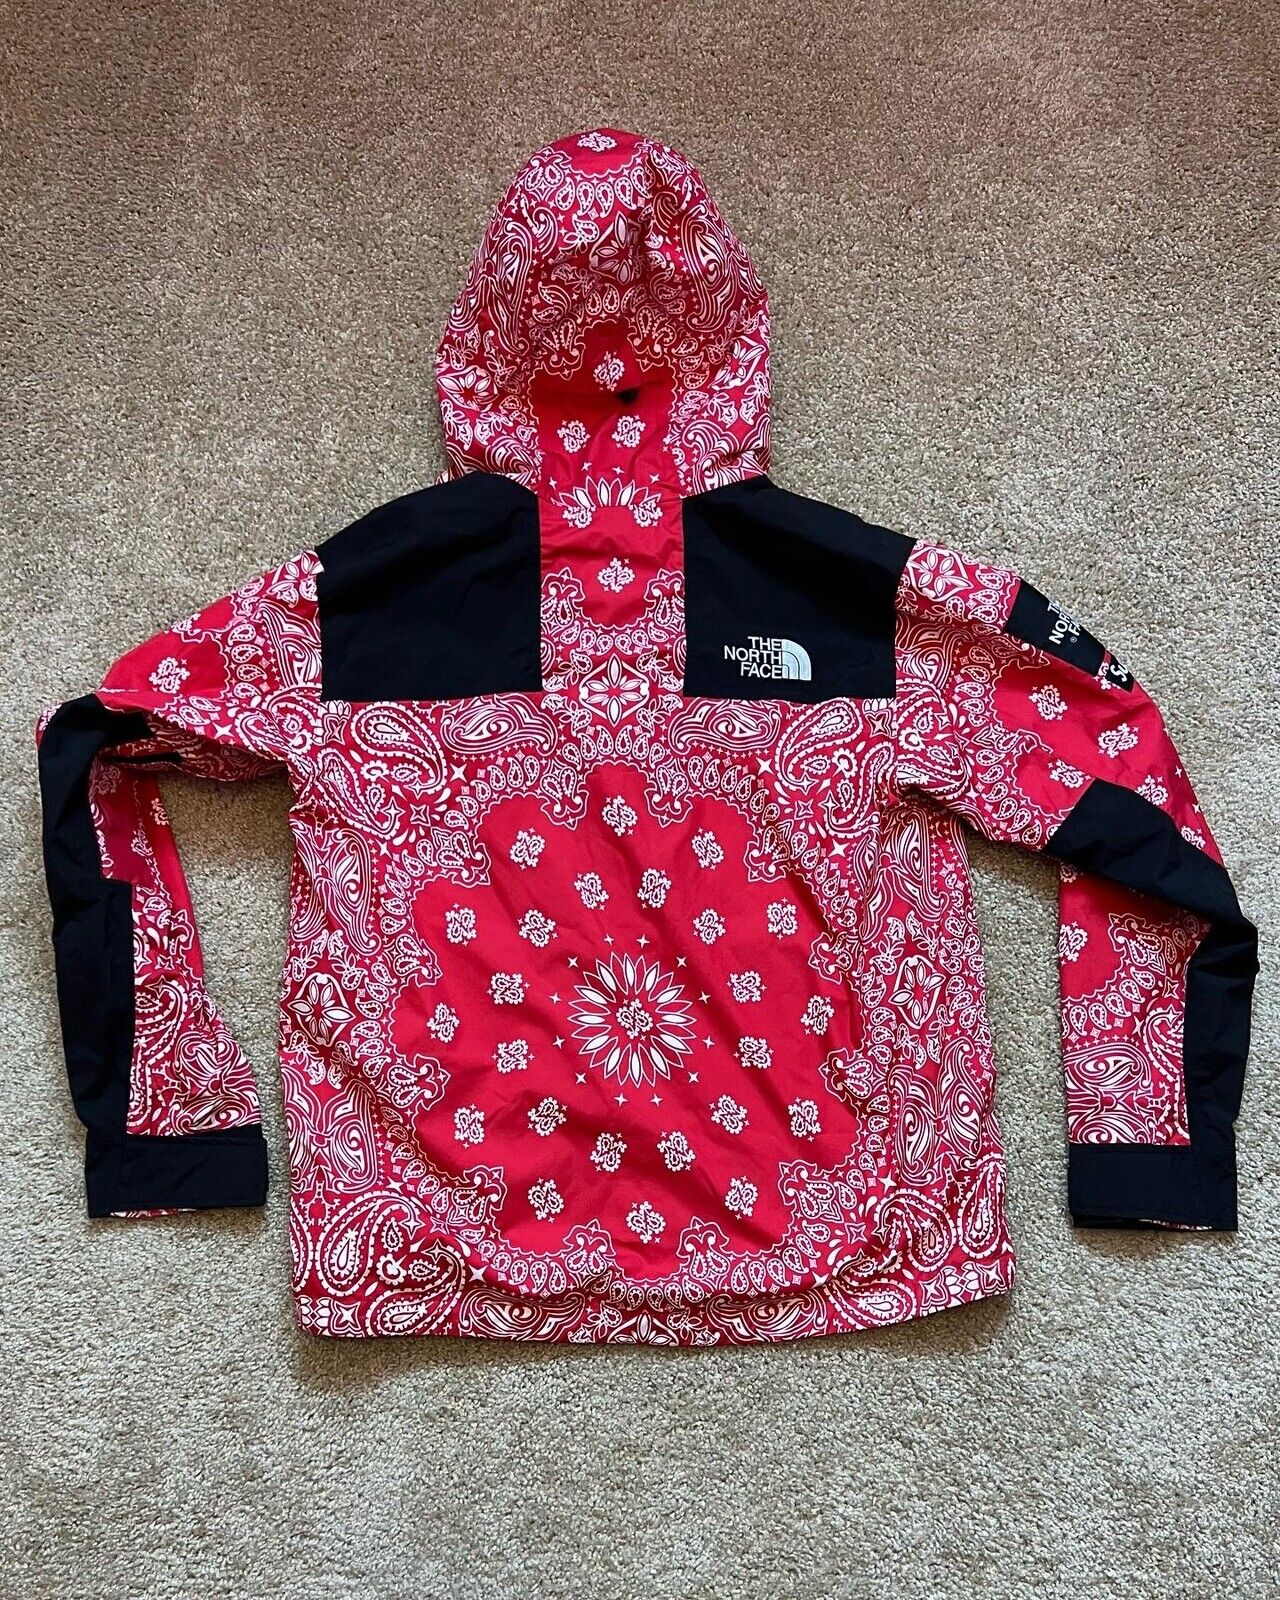 Supreme 2014 The North Face Bandana Mountain Jacket Red Size Large Authentic